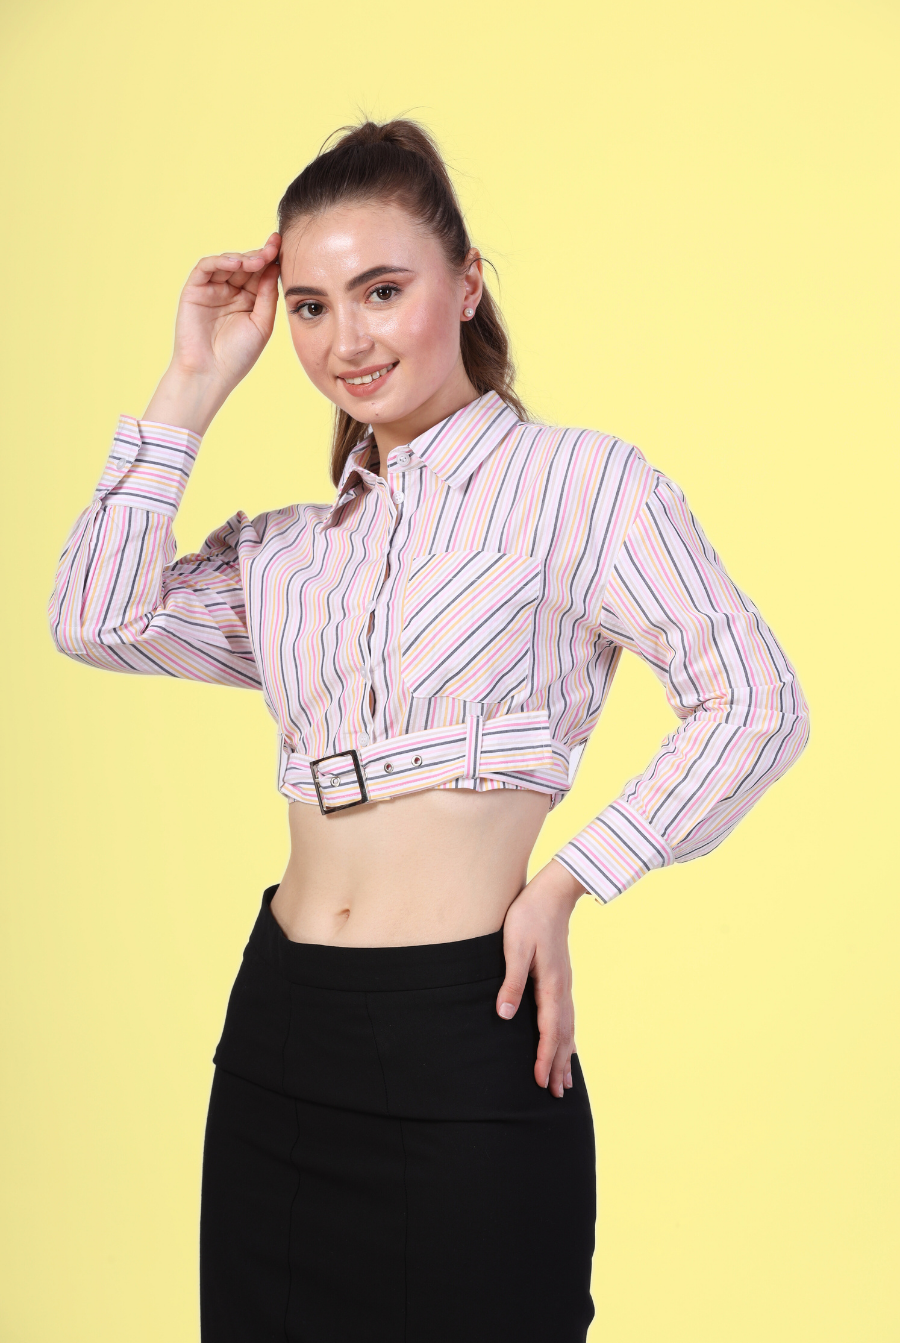 Women wearing crop shirt with full sleeves and black skirt